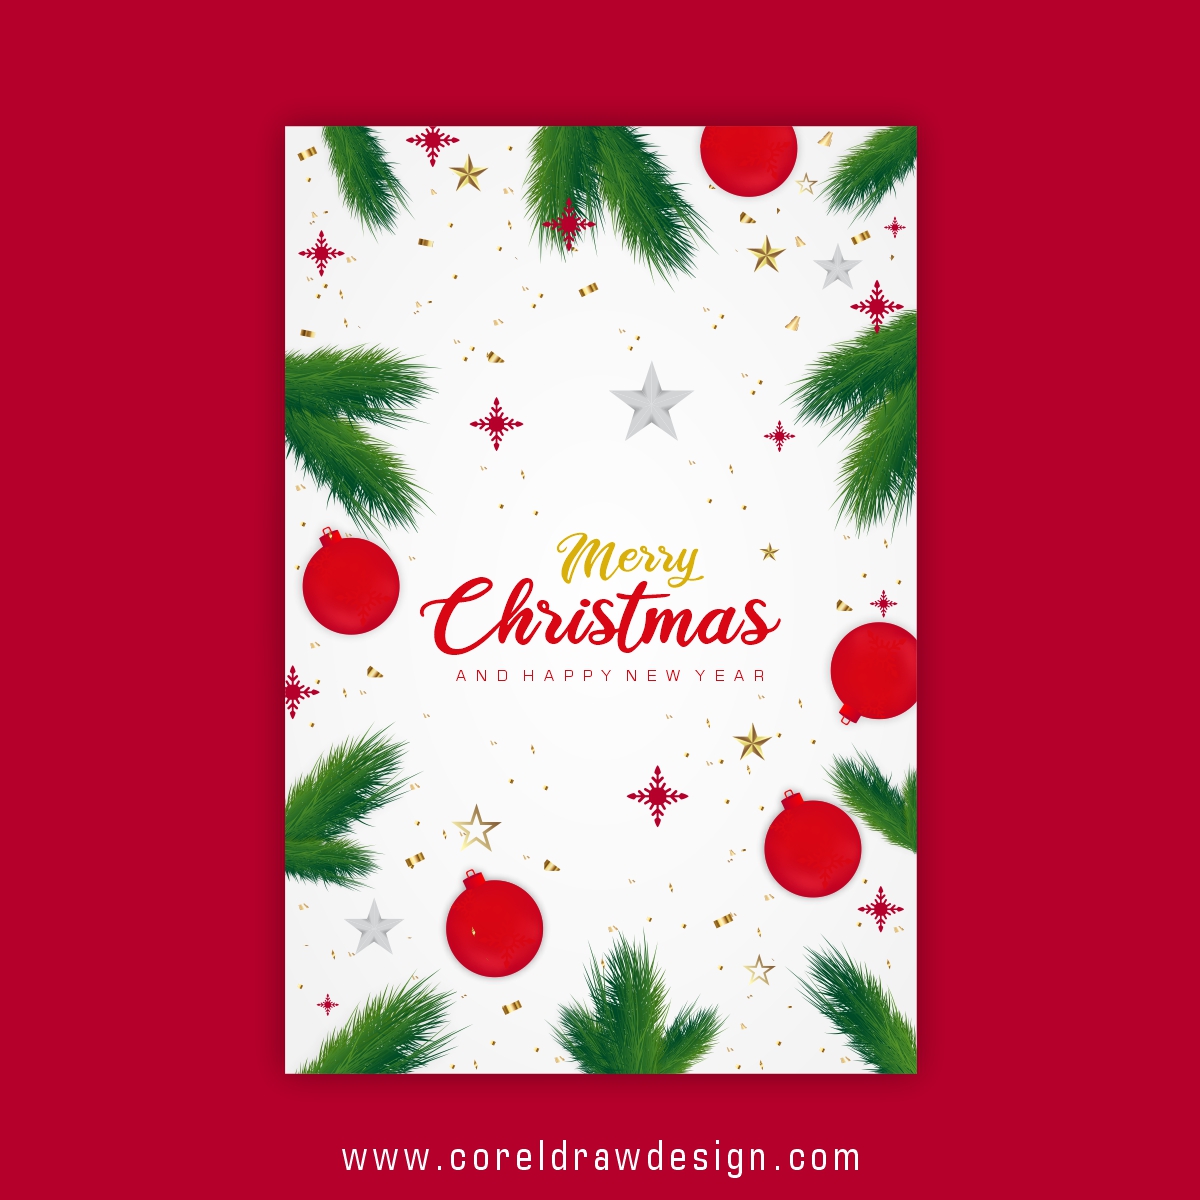 Download Realistic Christmas Cards Template Free Vector Design